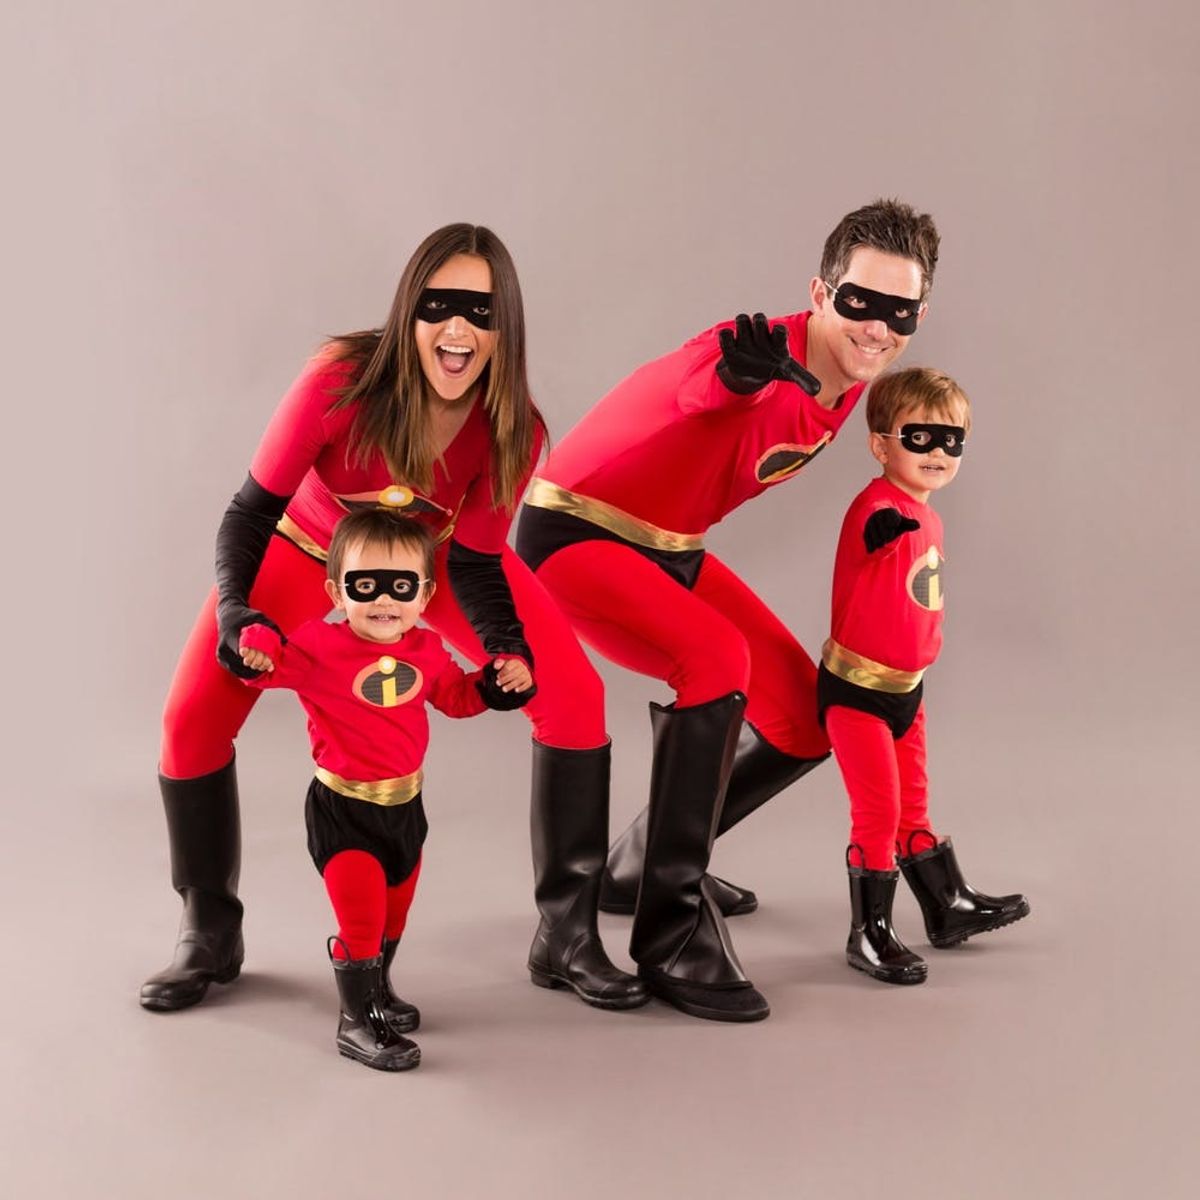 This Last-Minute ‘Incredibles’ Halloween Costume Is Family #Goals ...